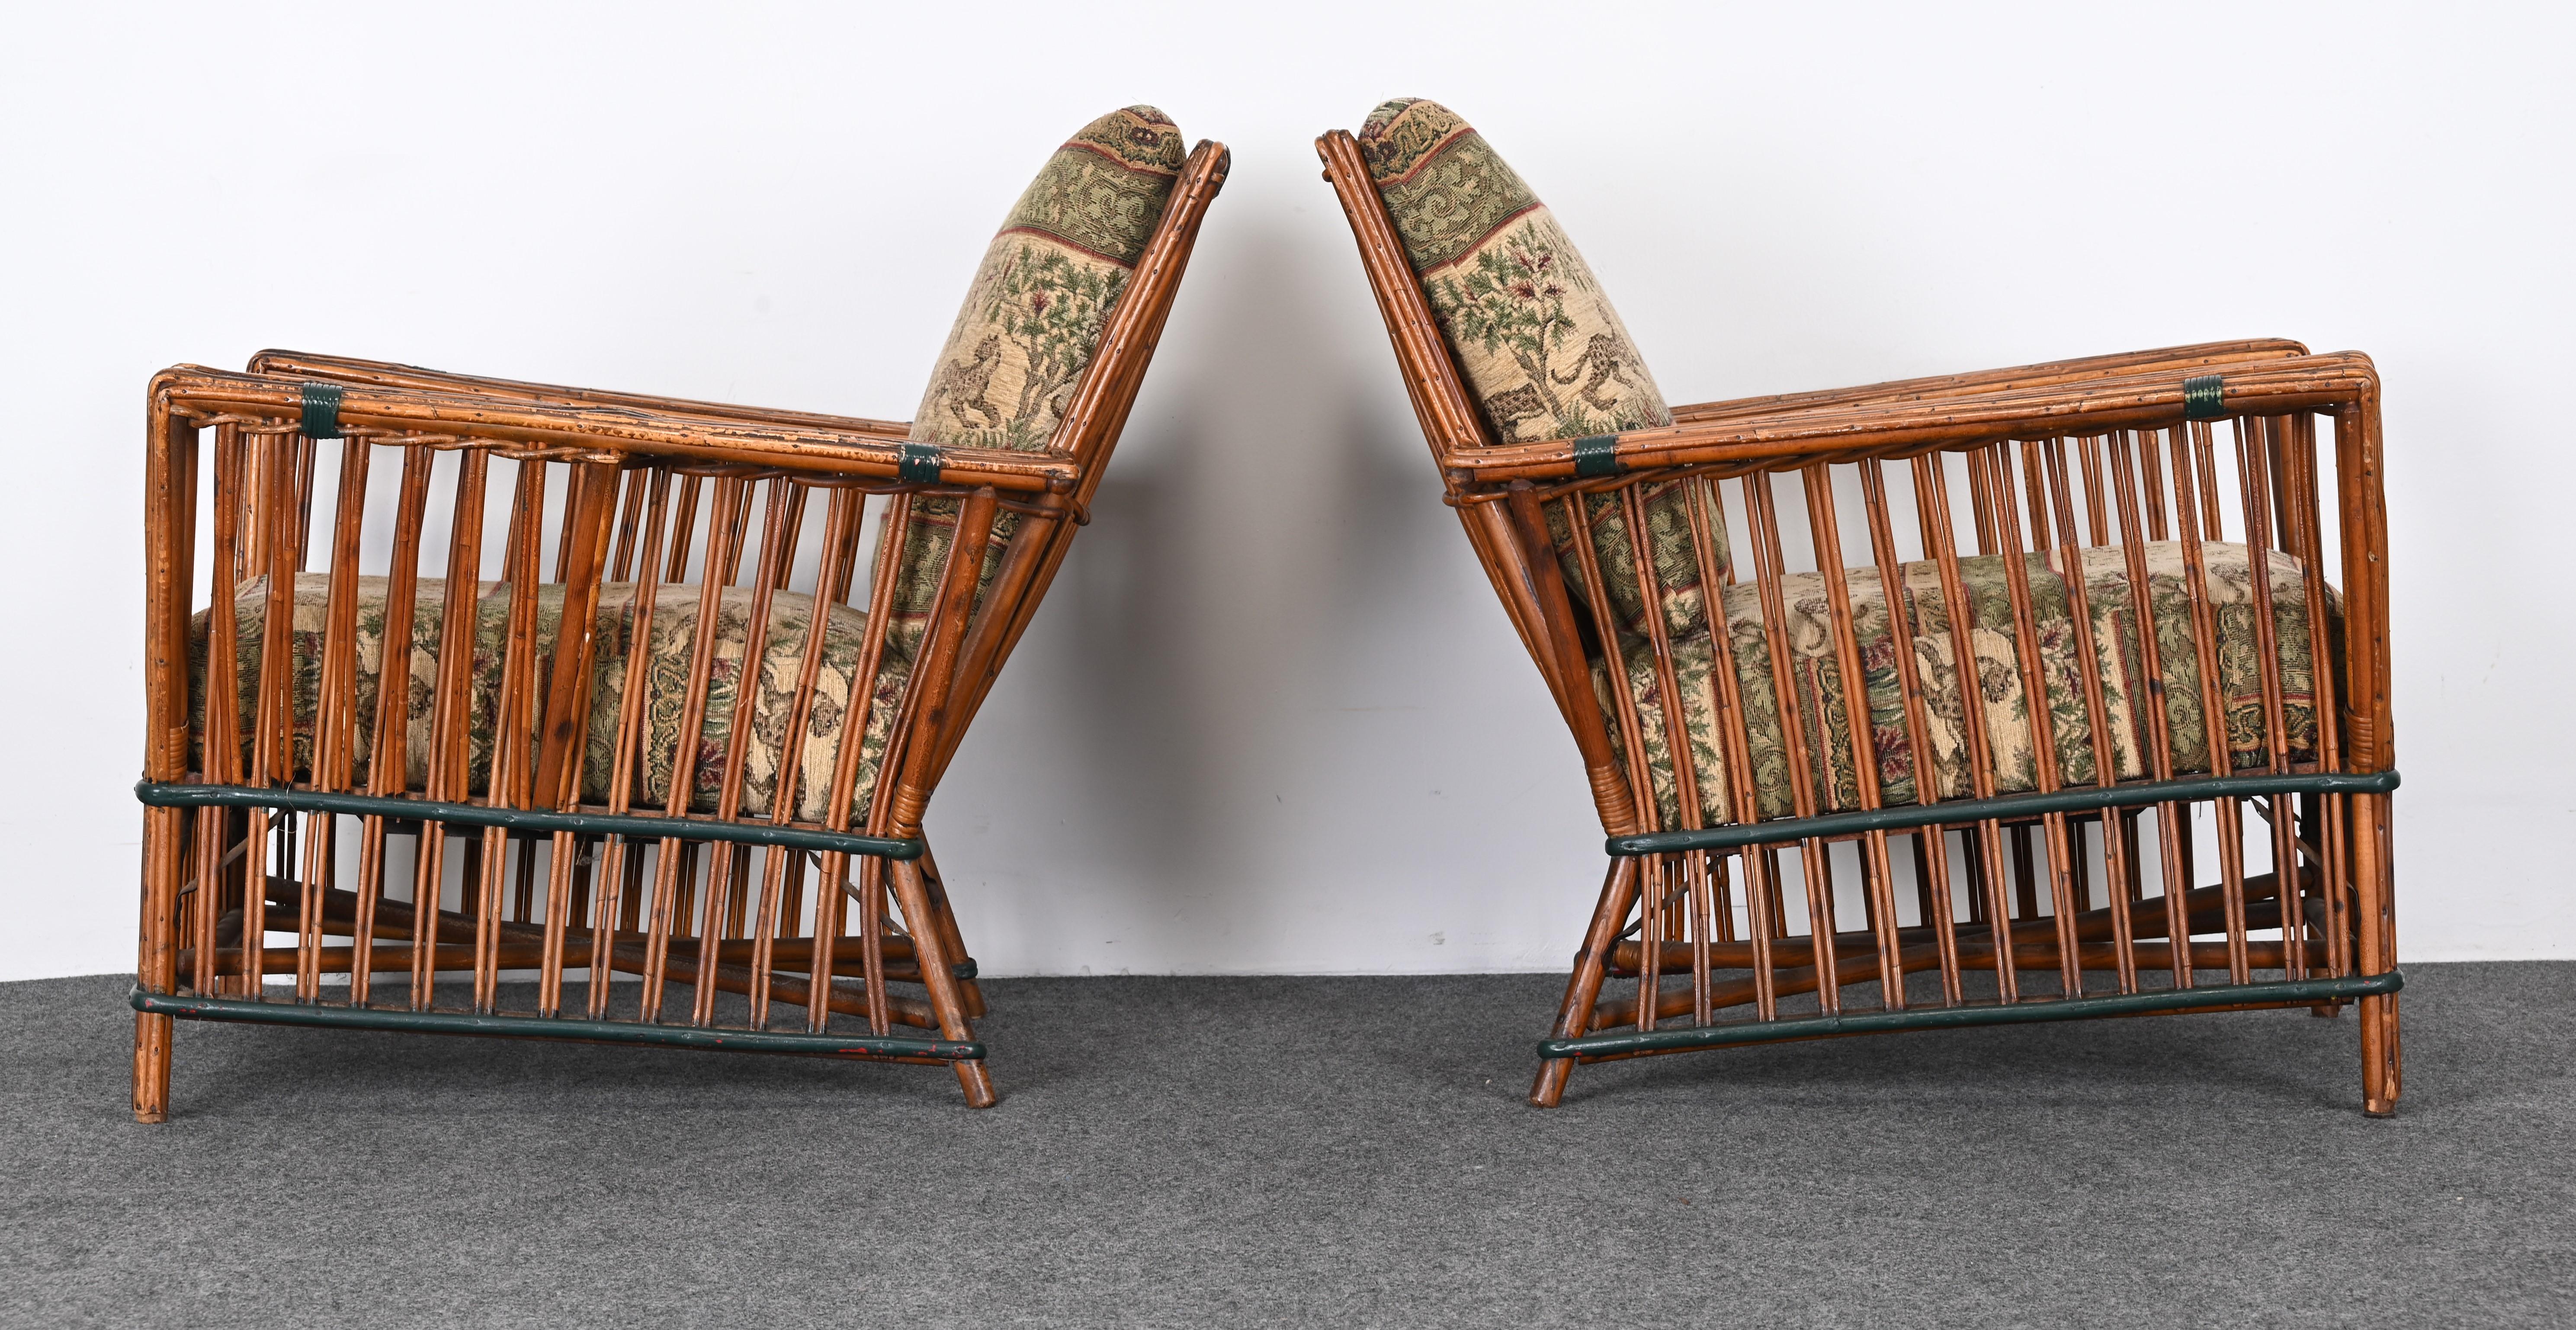 Art Deco Split Ypsilanti Stick Reed Wicker or Sofa with Pair Arm Chairs c. 1930s For Sale 7